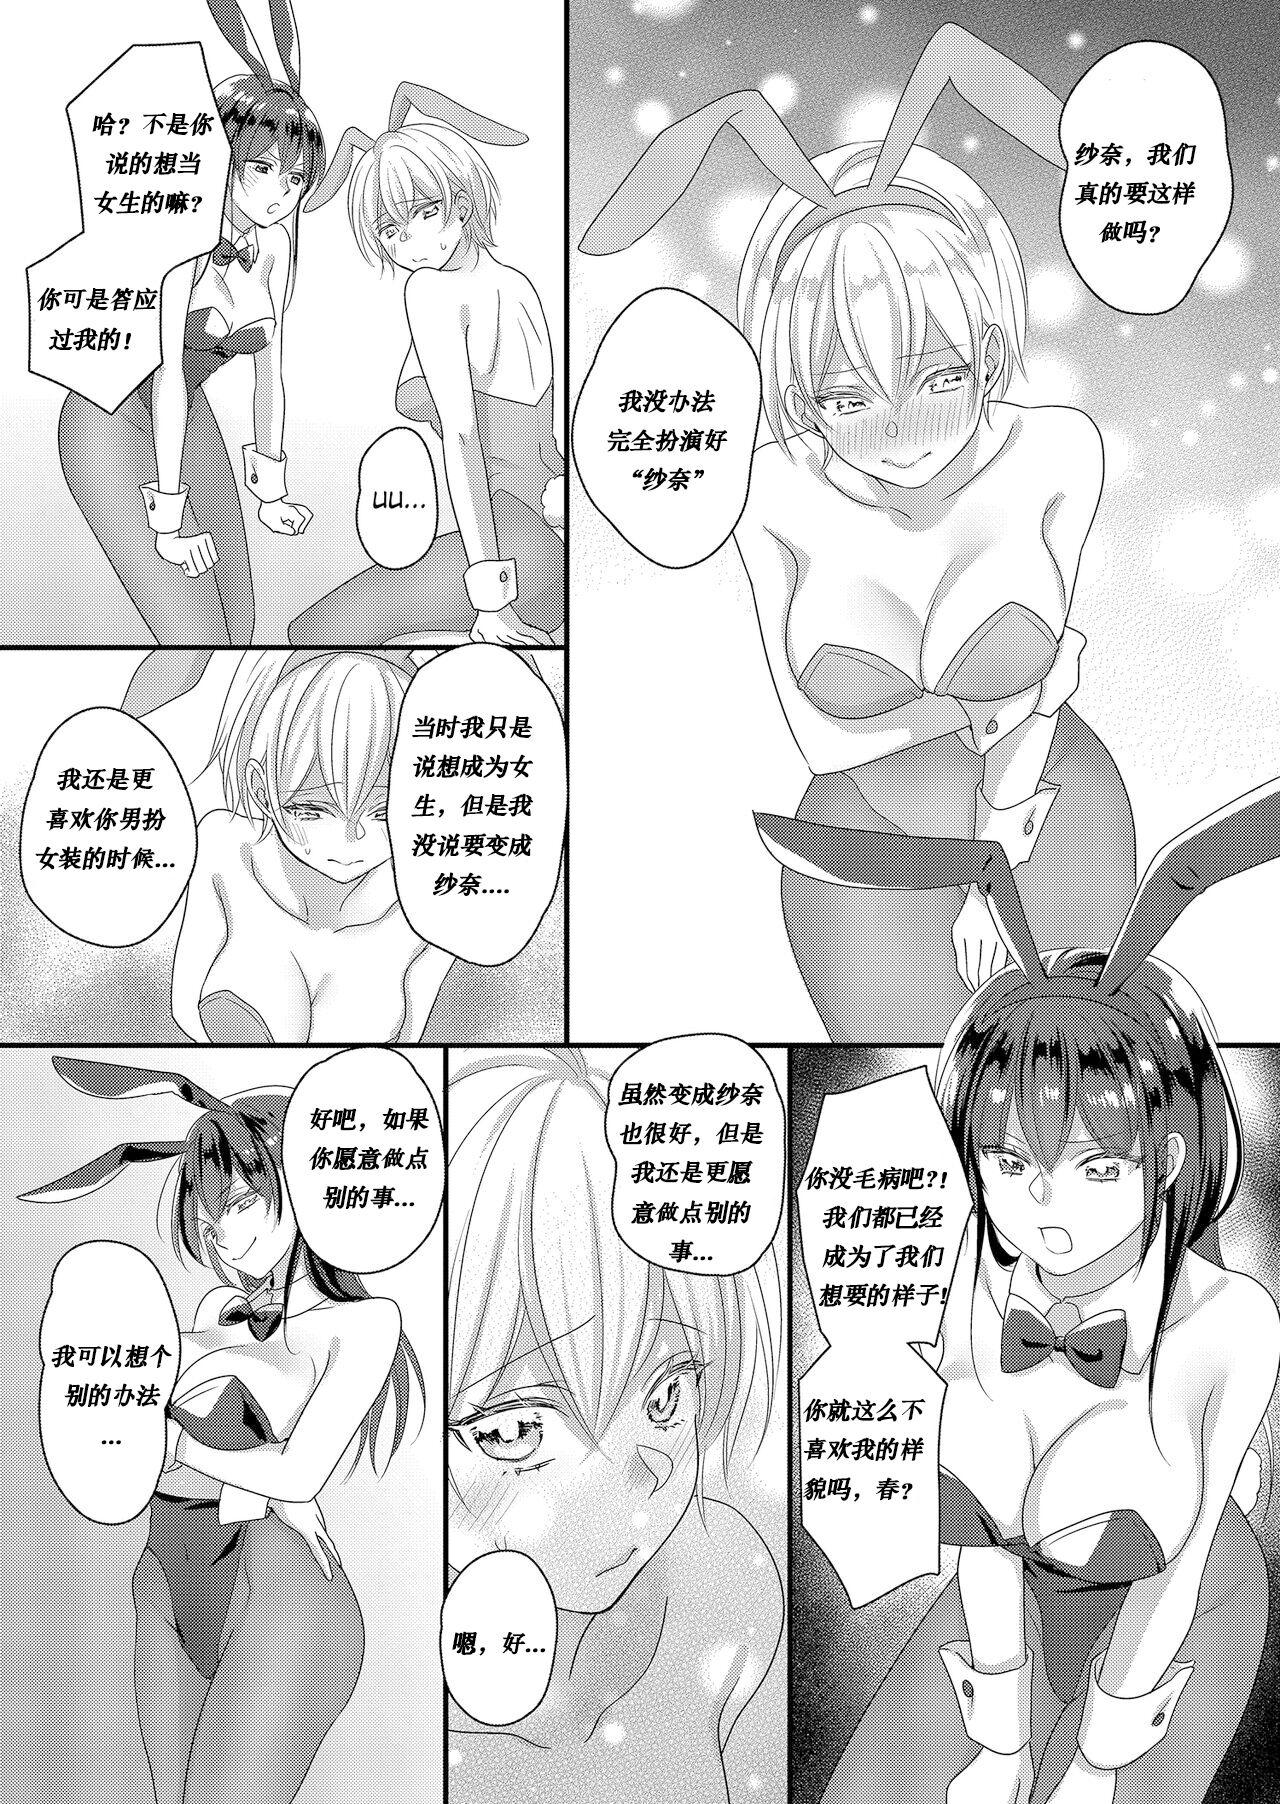 Family Roleplay Haru to Sana 2 Cocks - Picture 3